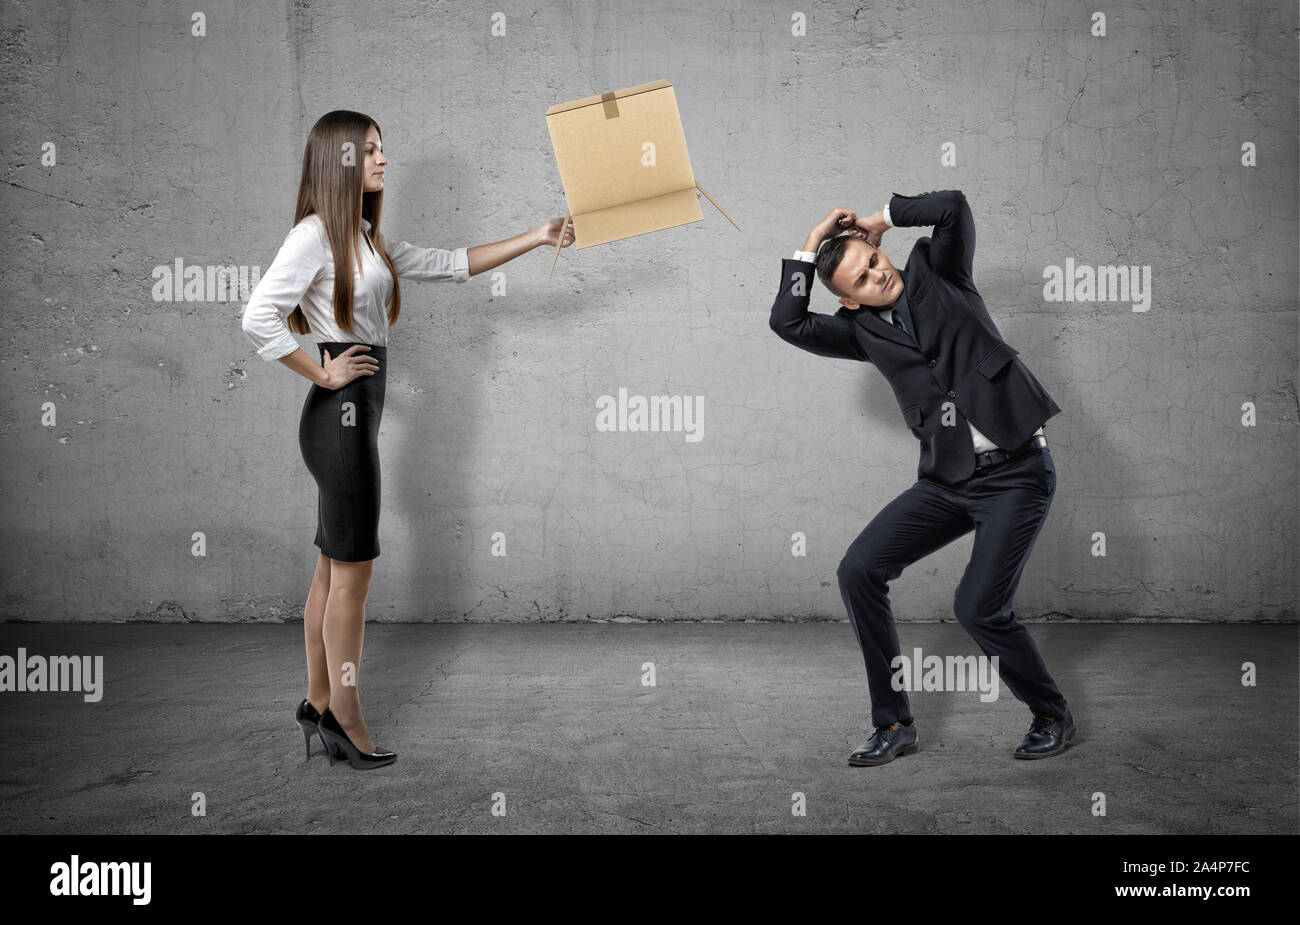 Businesswoman on concrete background holding a carton box to a cowering man. Stock Photo